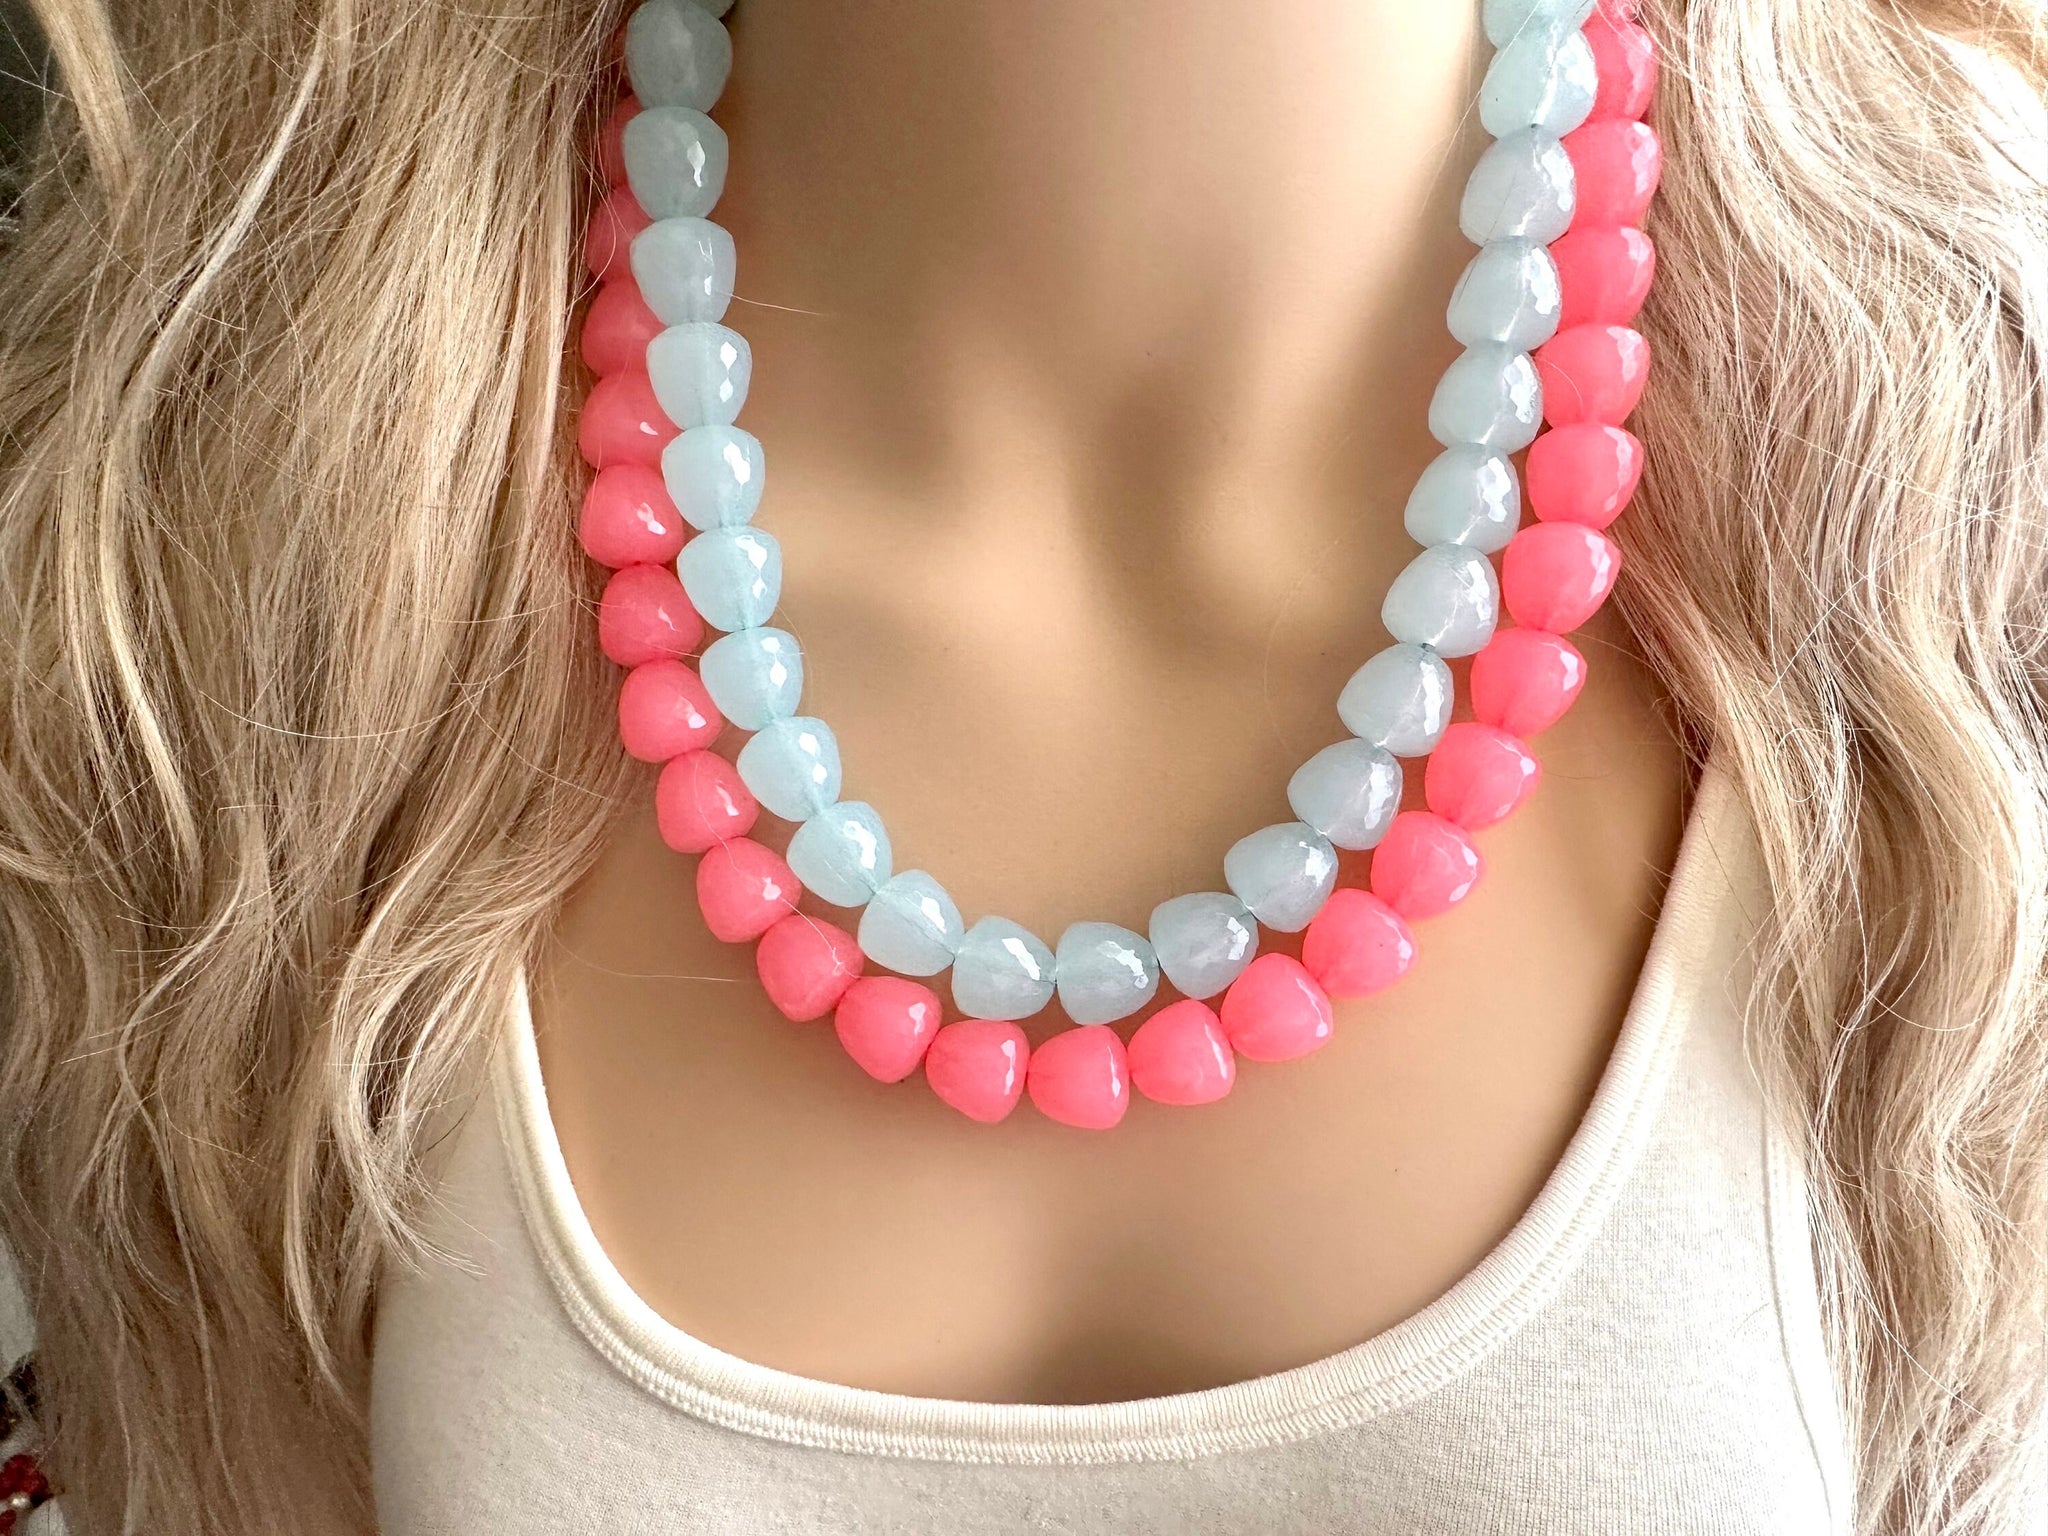 Mountain Sunrise Chunky Statement Necklace, Peach Beaded Necklace, 1 Strand Thick  Necklace, Big Beaded Jewelry Turquoise Blue - Etsy